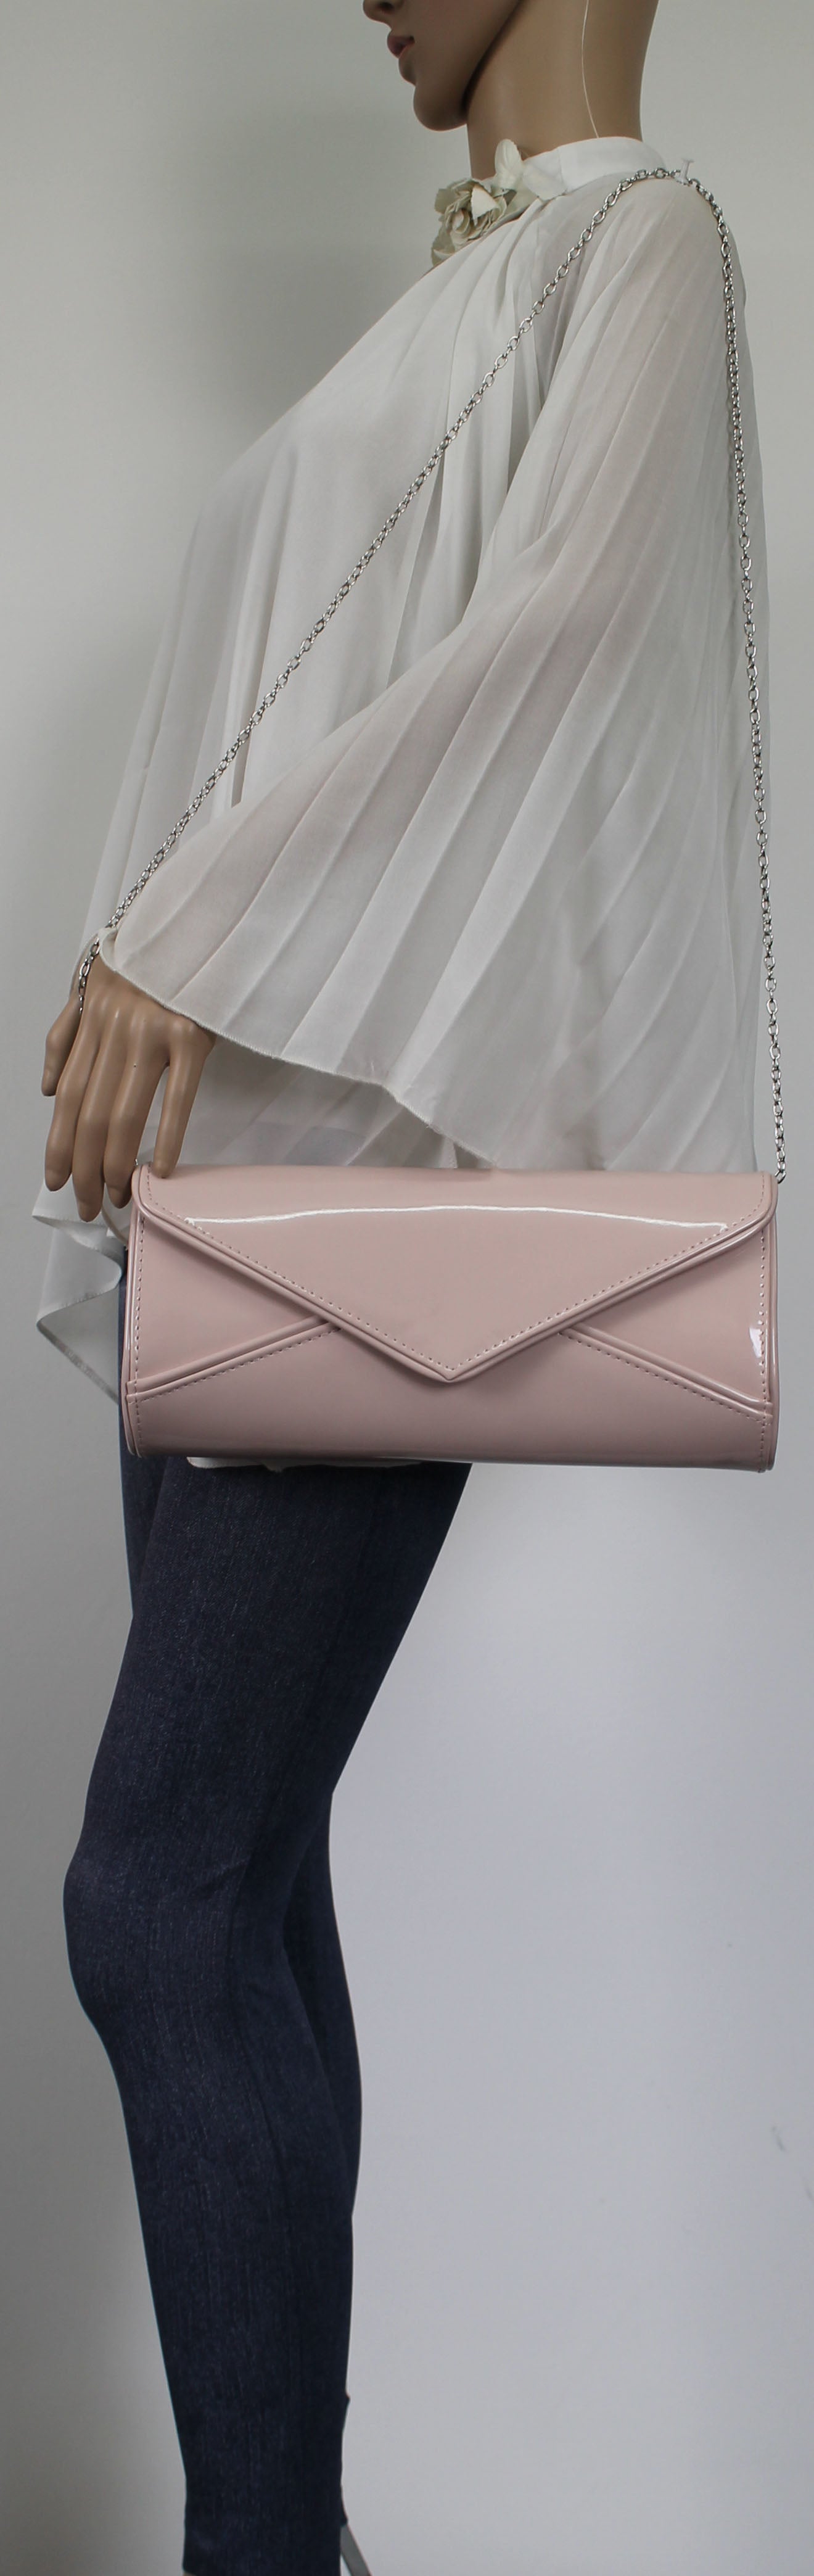 SWANKYSWANS Perry Patent Clutch Bag - Pink Cute Cheap Clutch Bag For Weddings School and Work